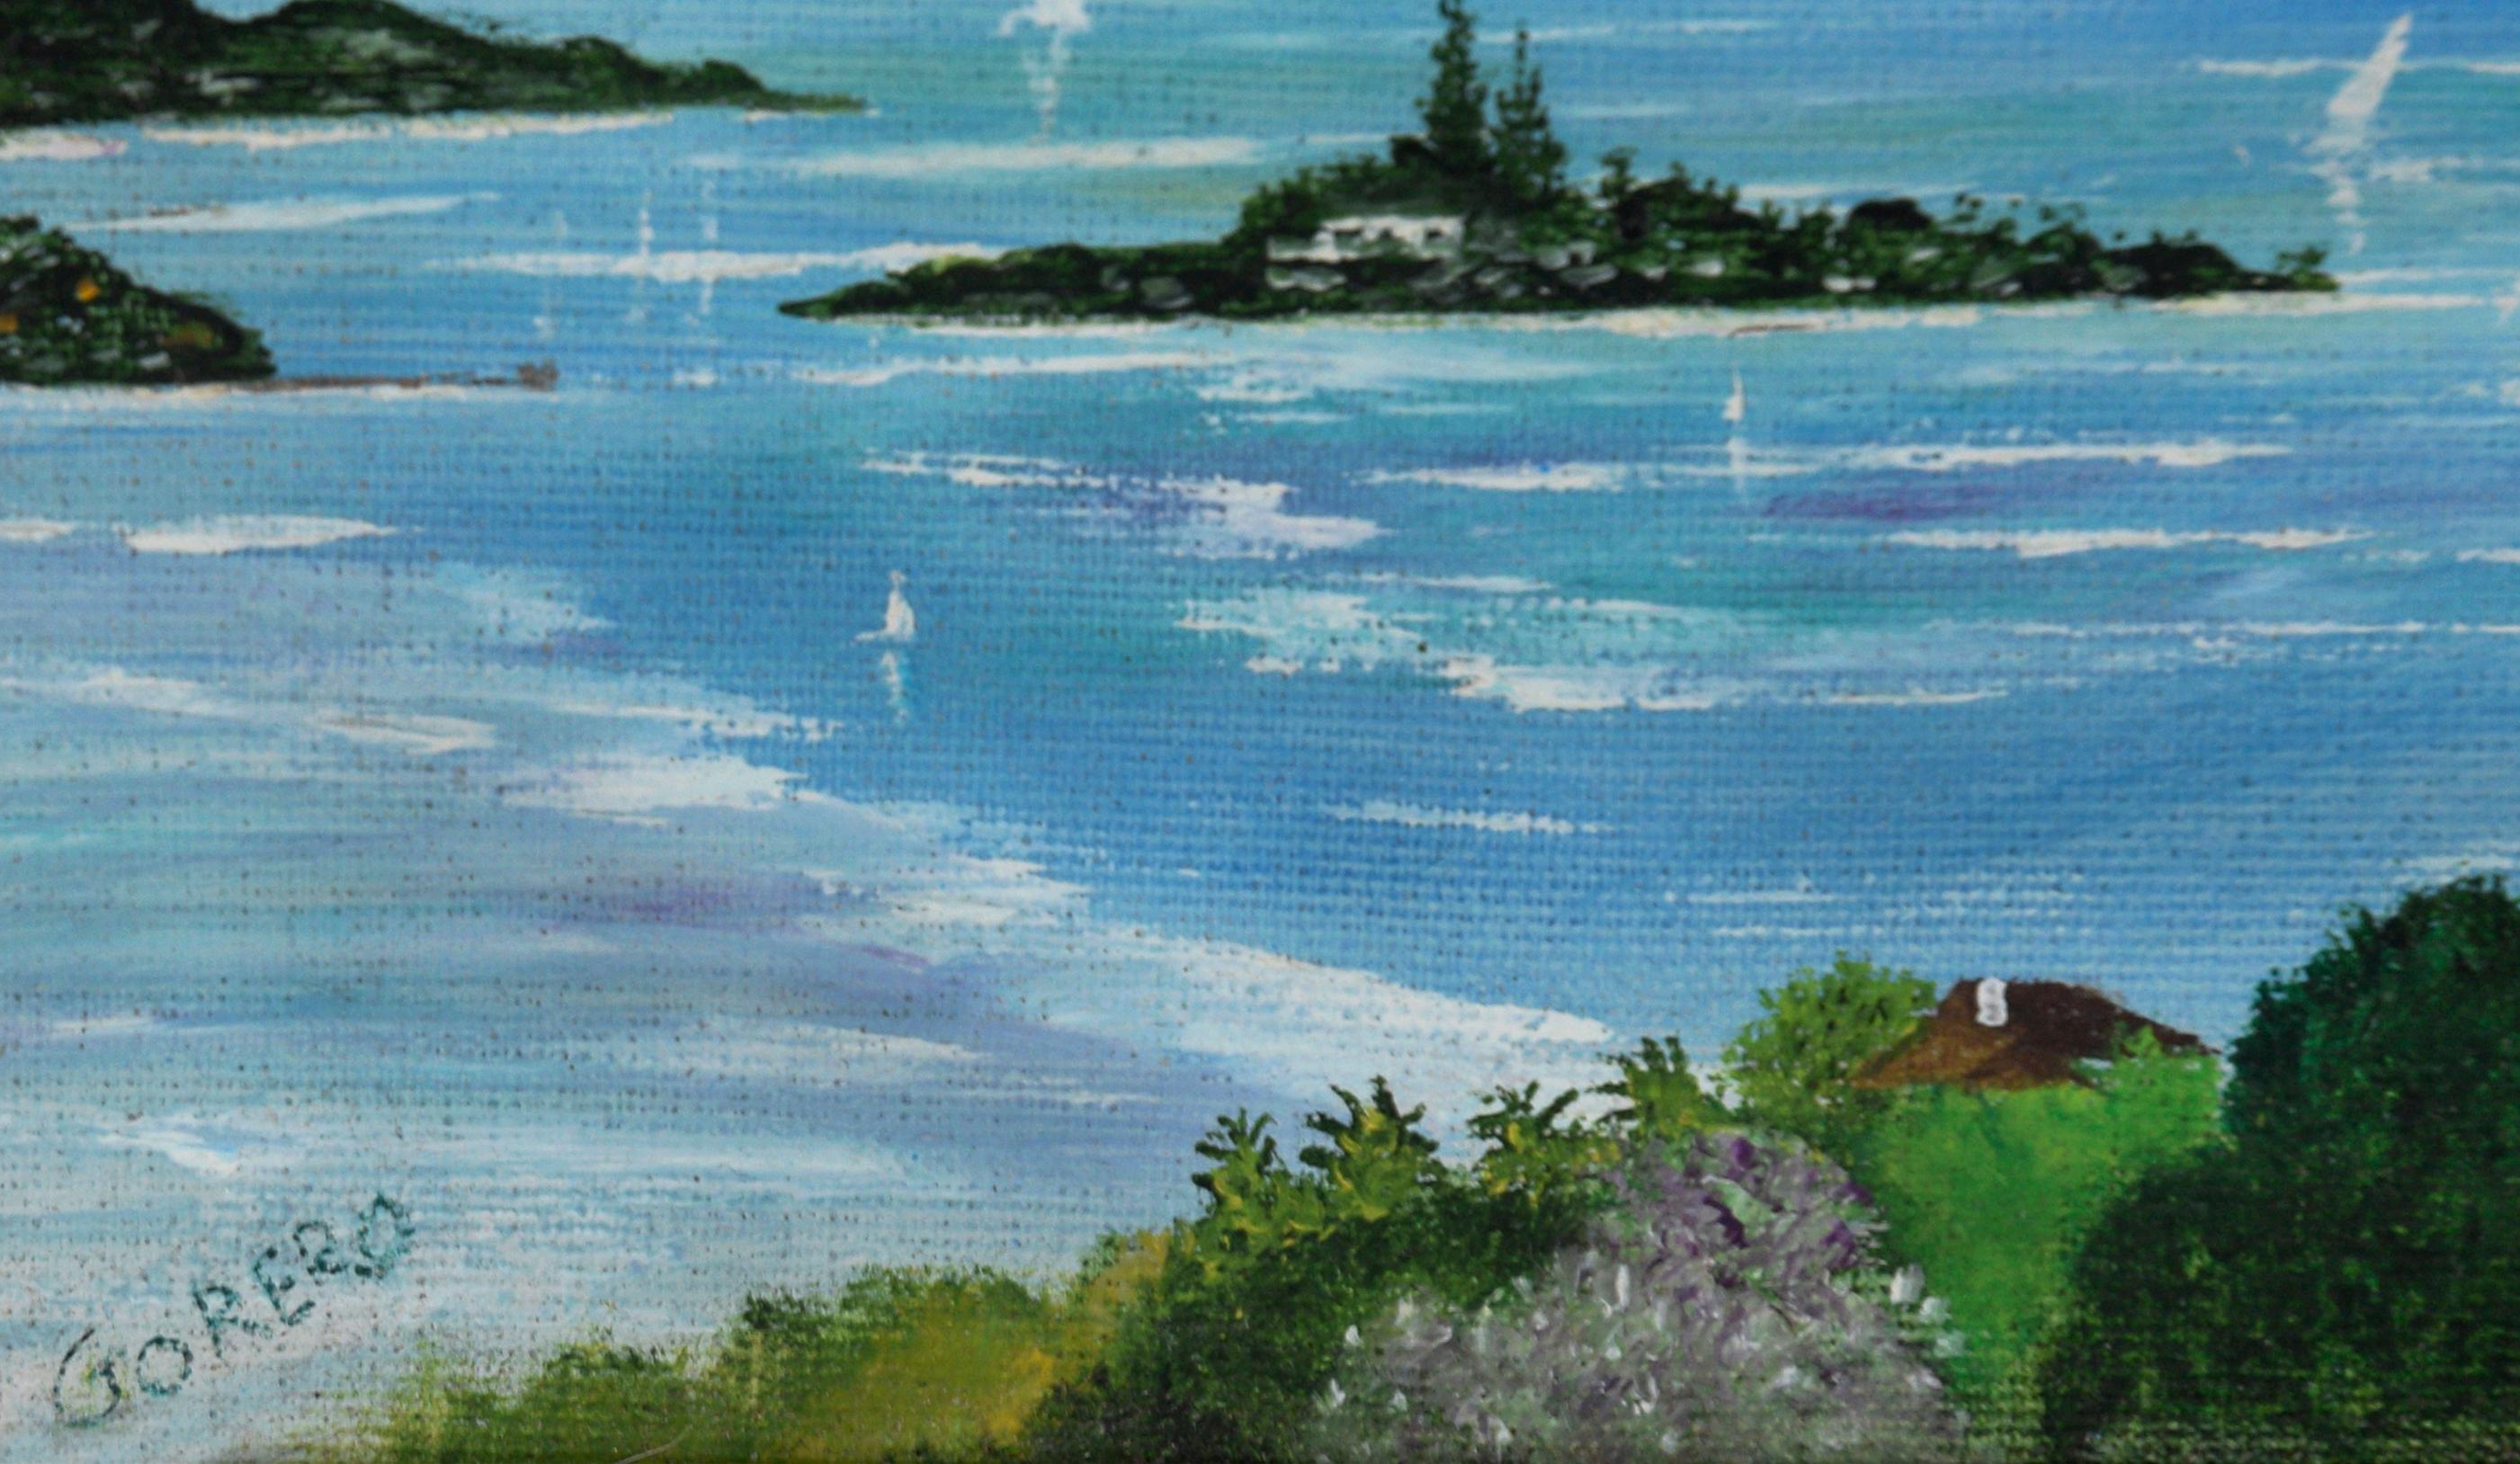 Kaneohe Bay, Hawaii 1989 - Oil on Canvas - Impressionist Painting by Gorero